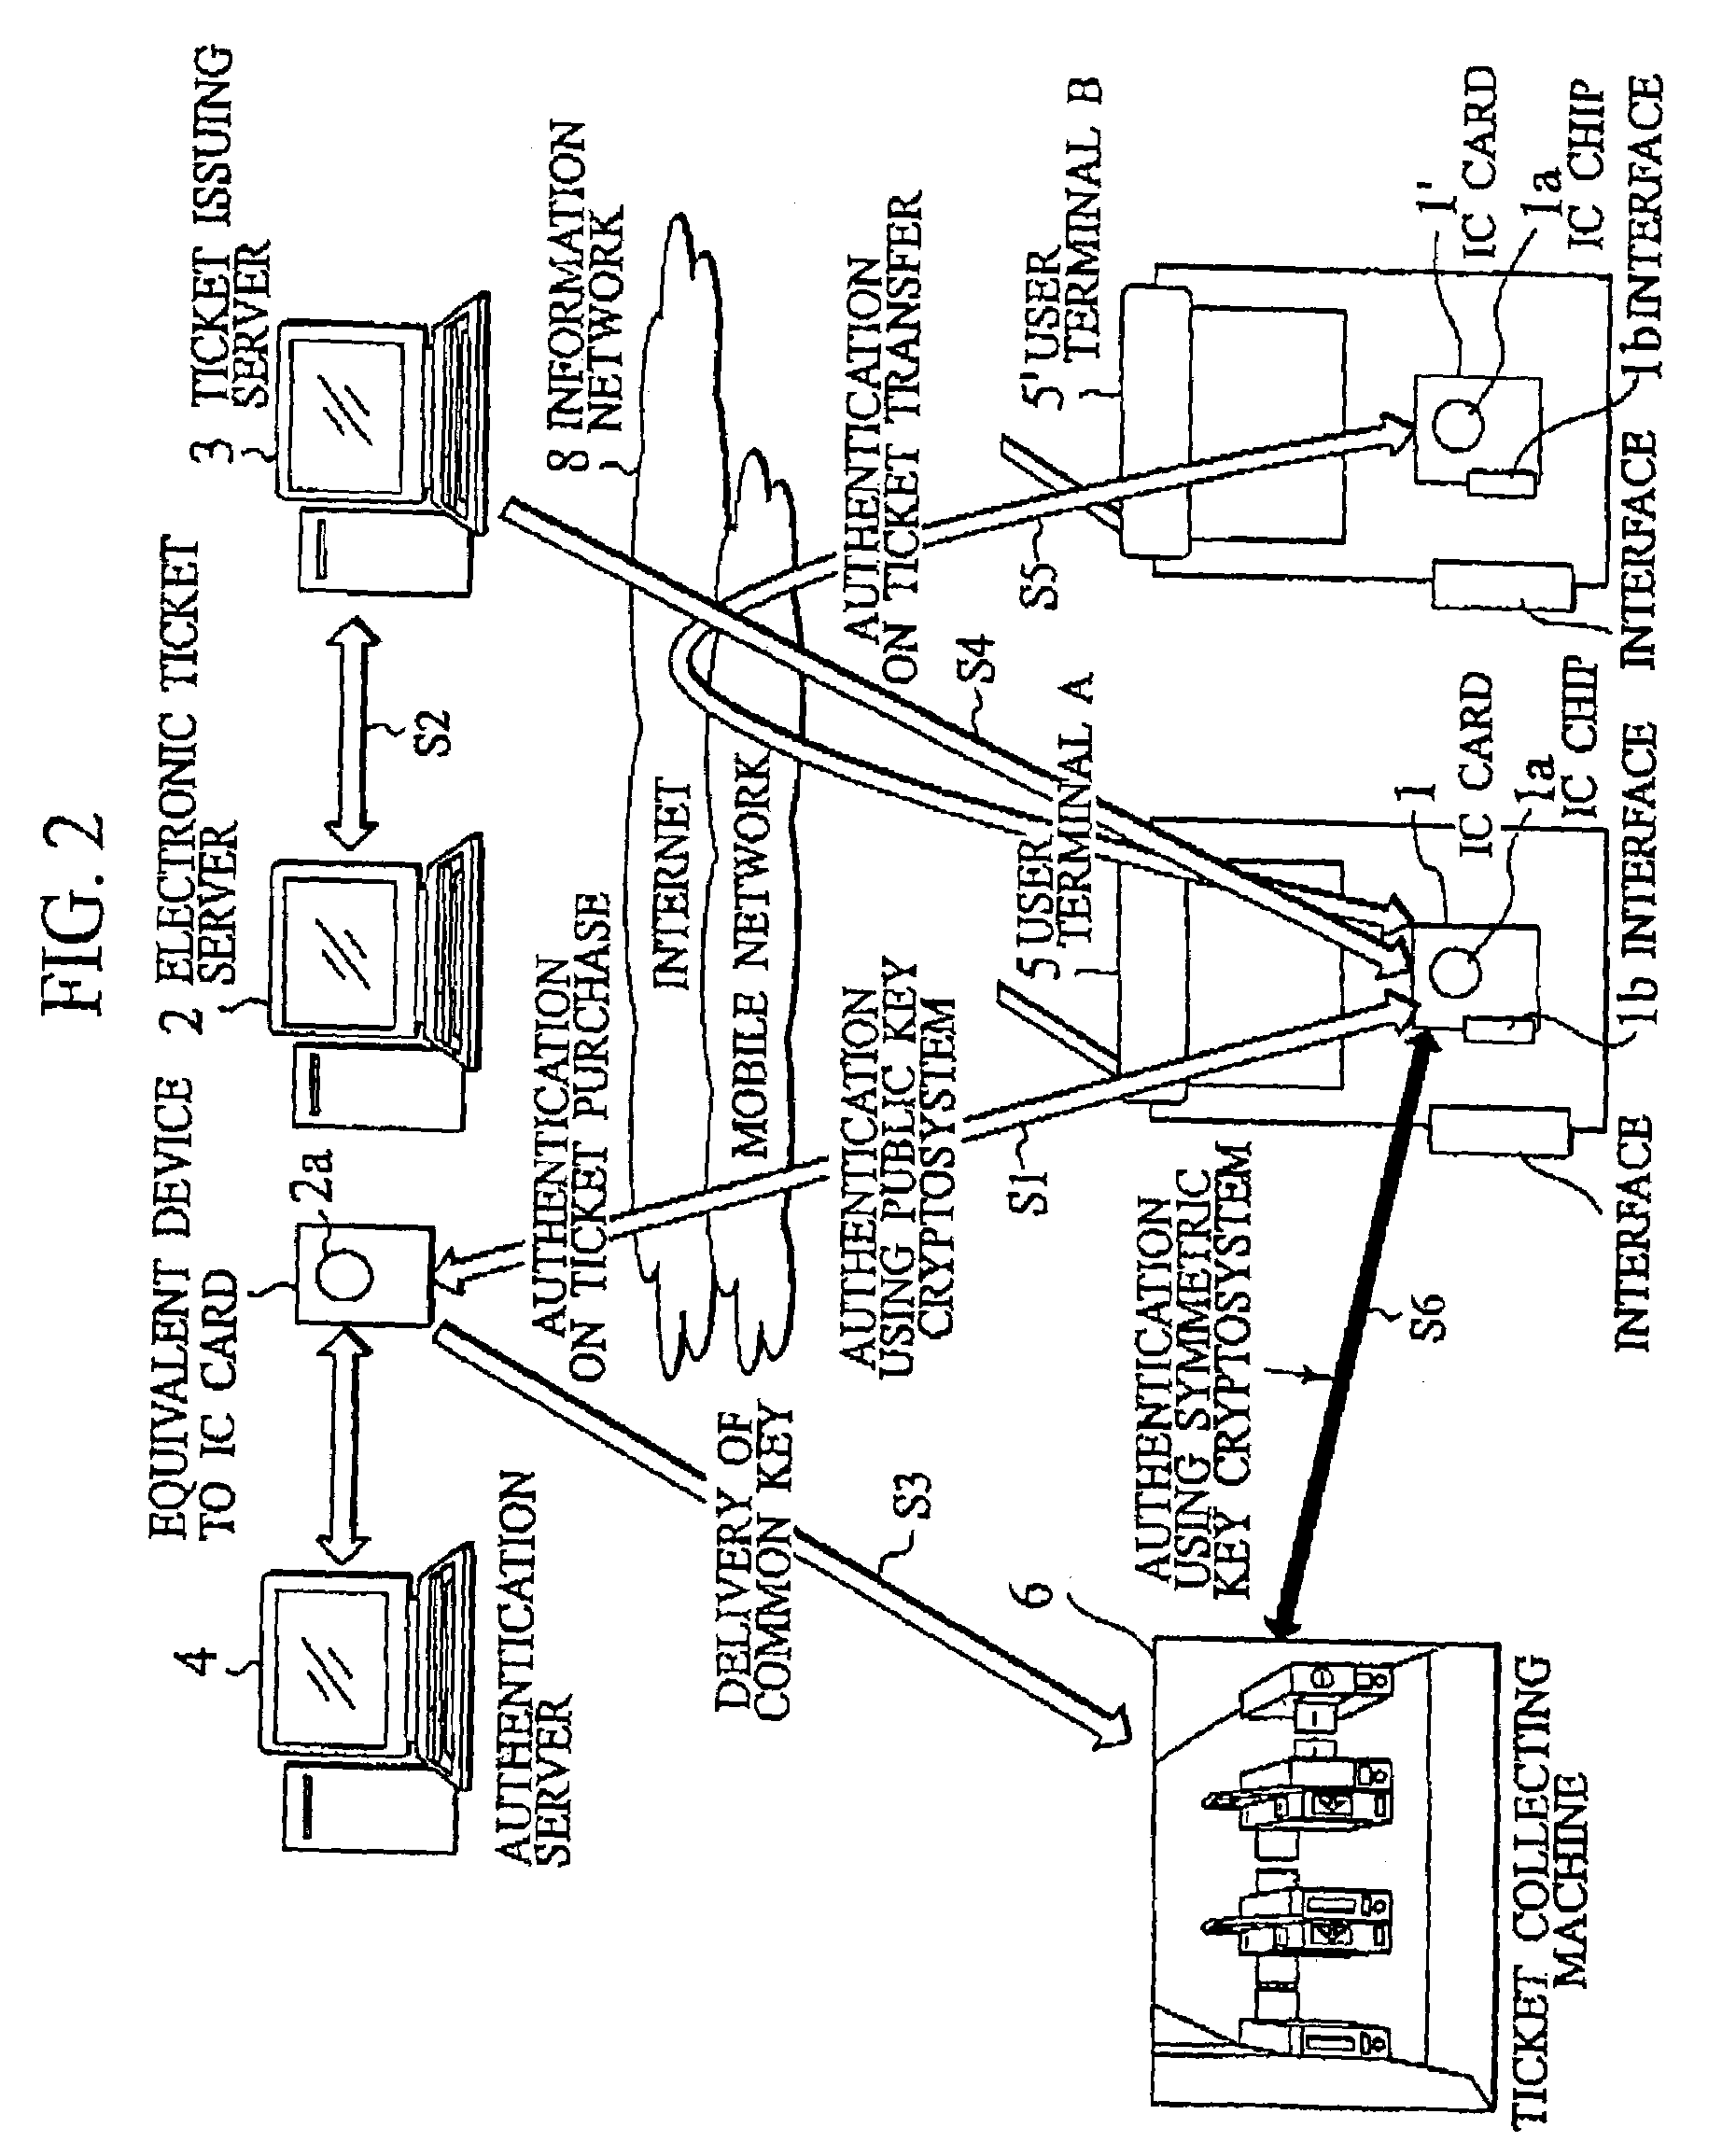 IC card and authentication method in electronic ticket distribution system